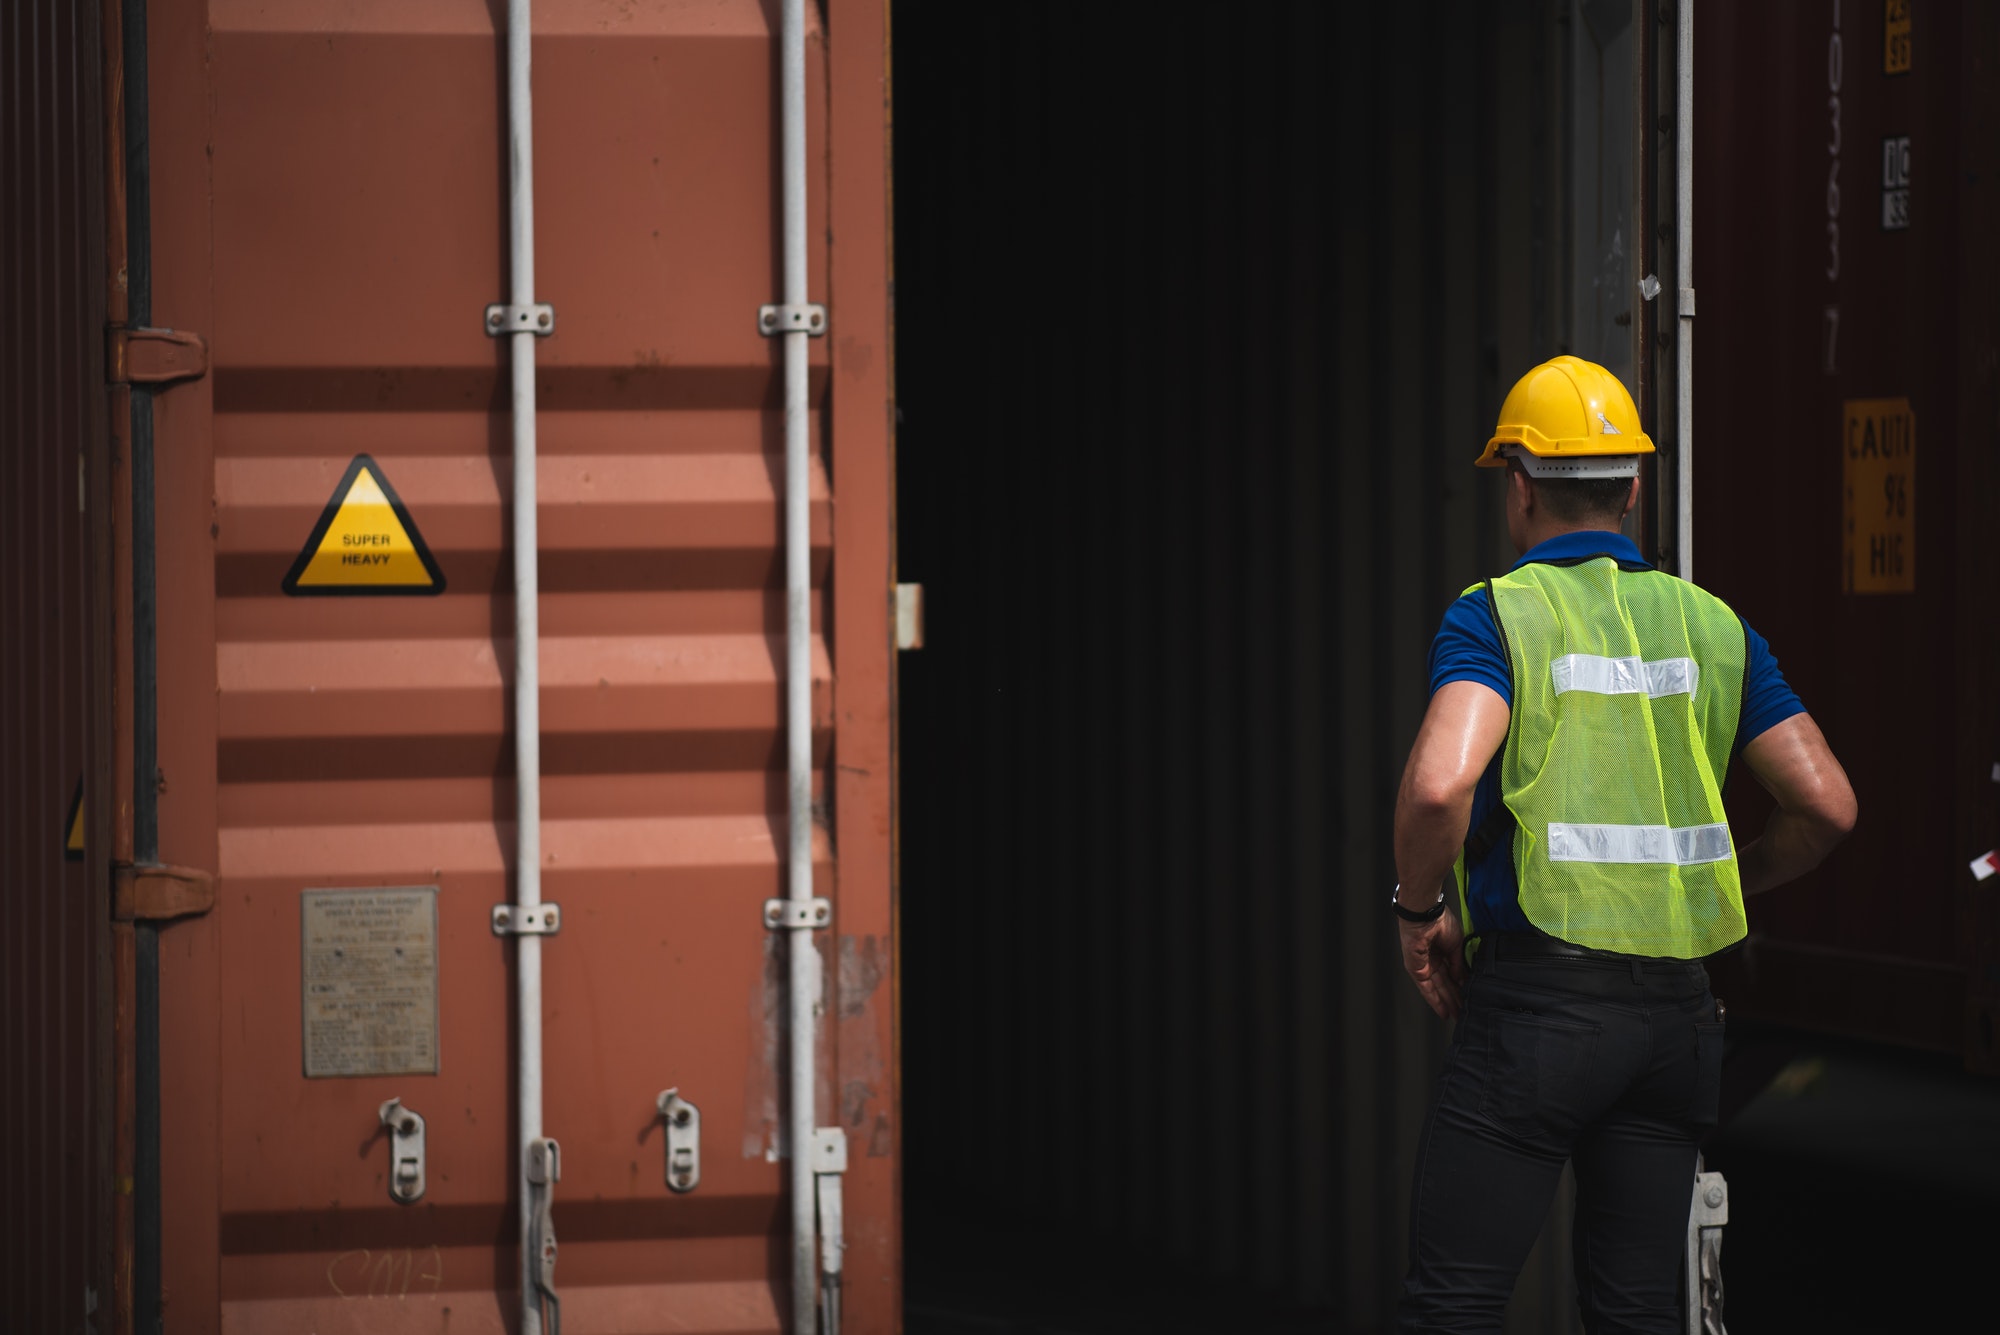 Foreman is opening the container door to inspect the goods inside the container